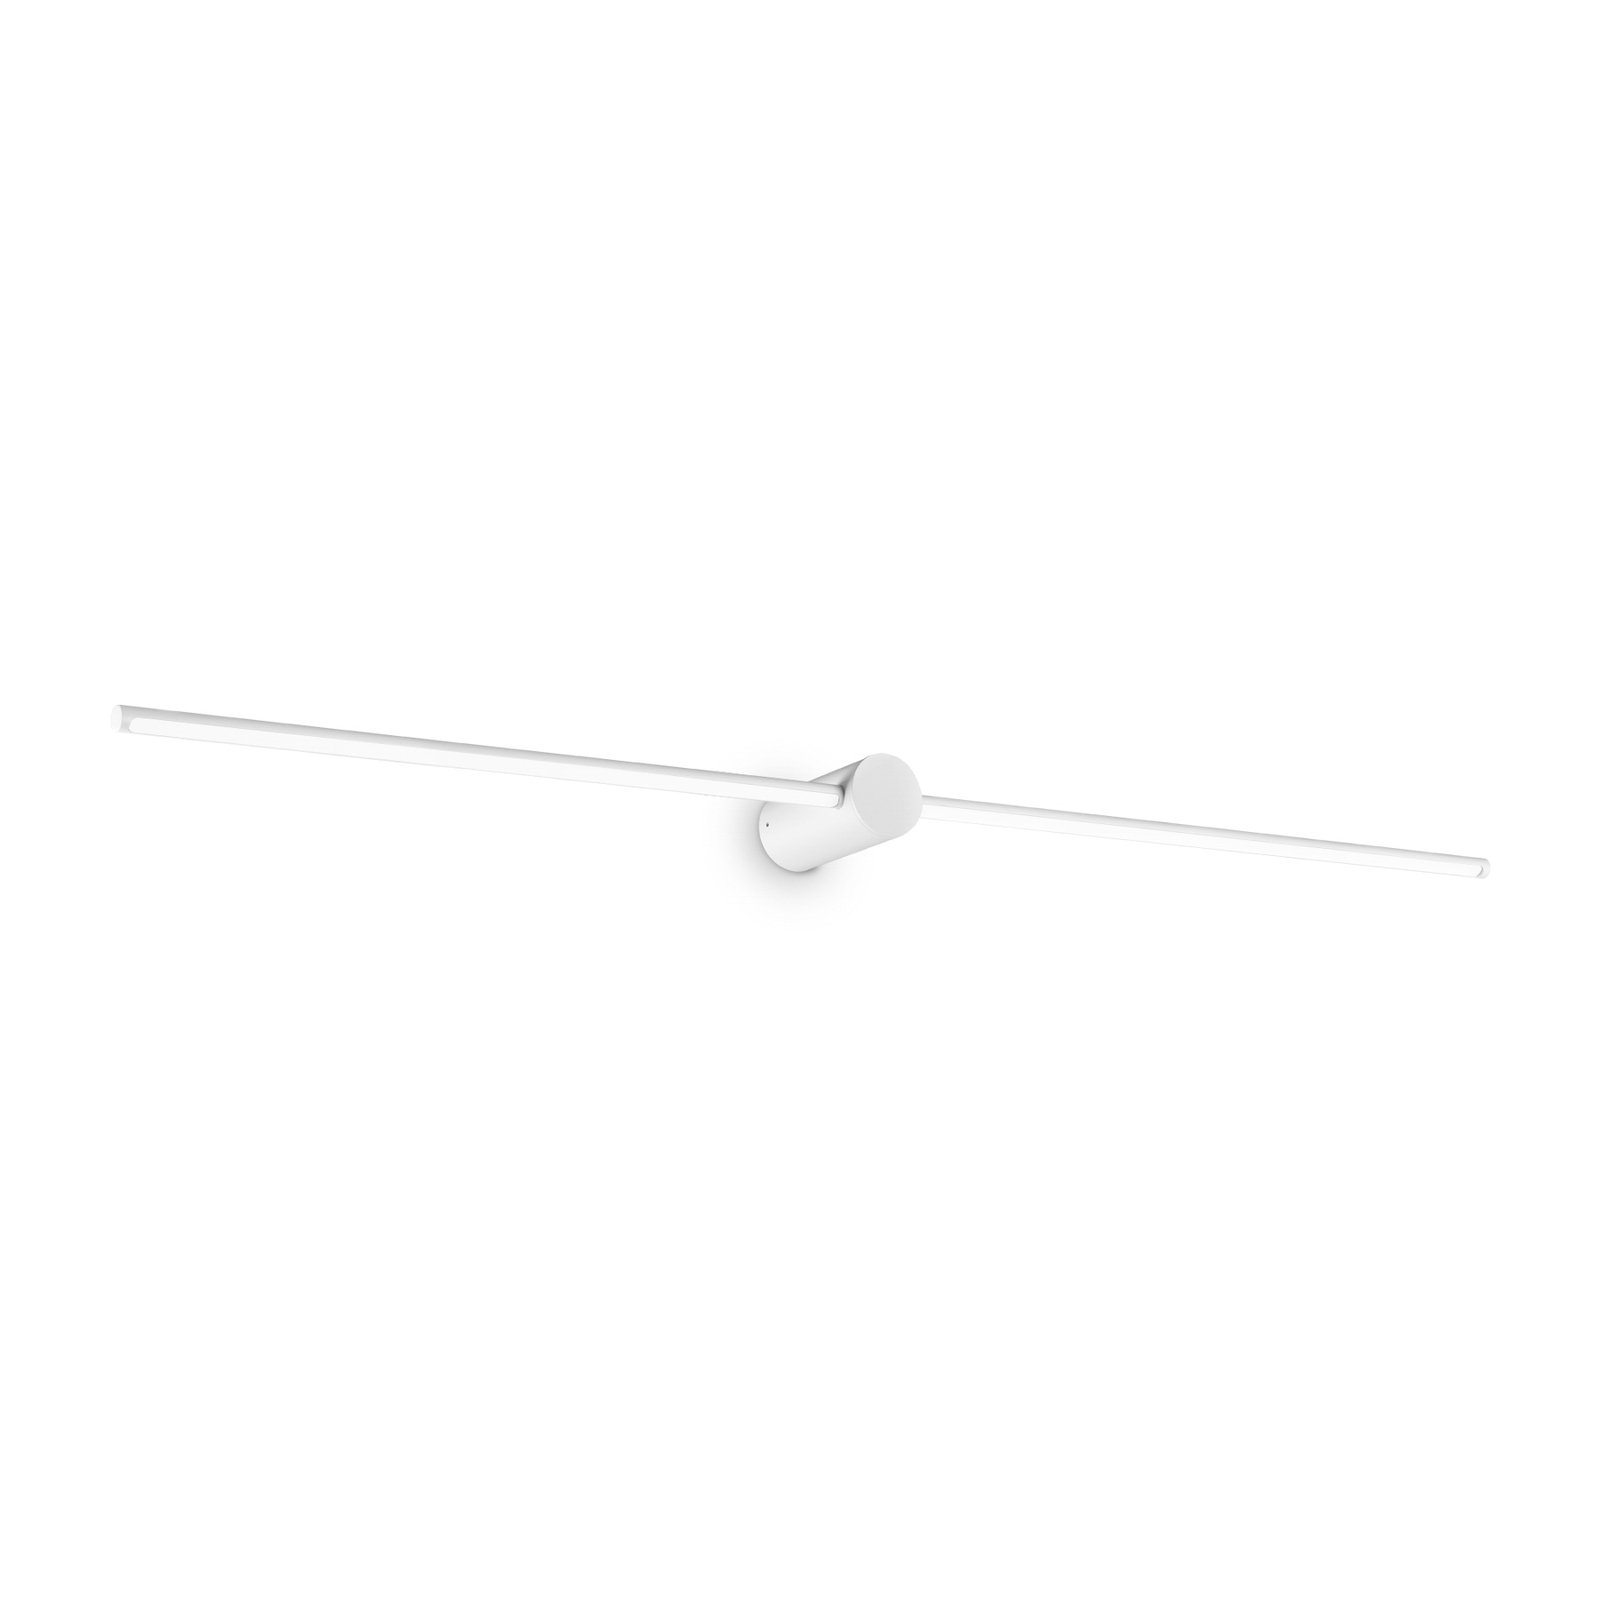 Ideal Lux LED bathroom wall lamp Filo white, width 115 cm, metal